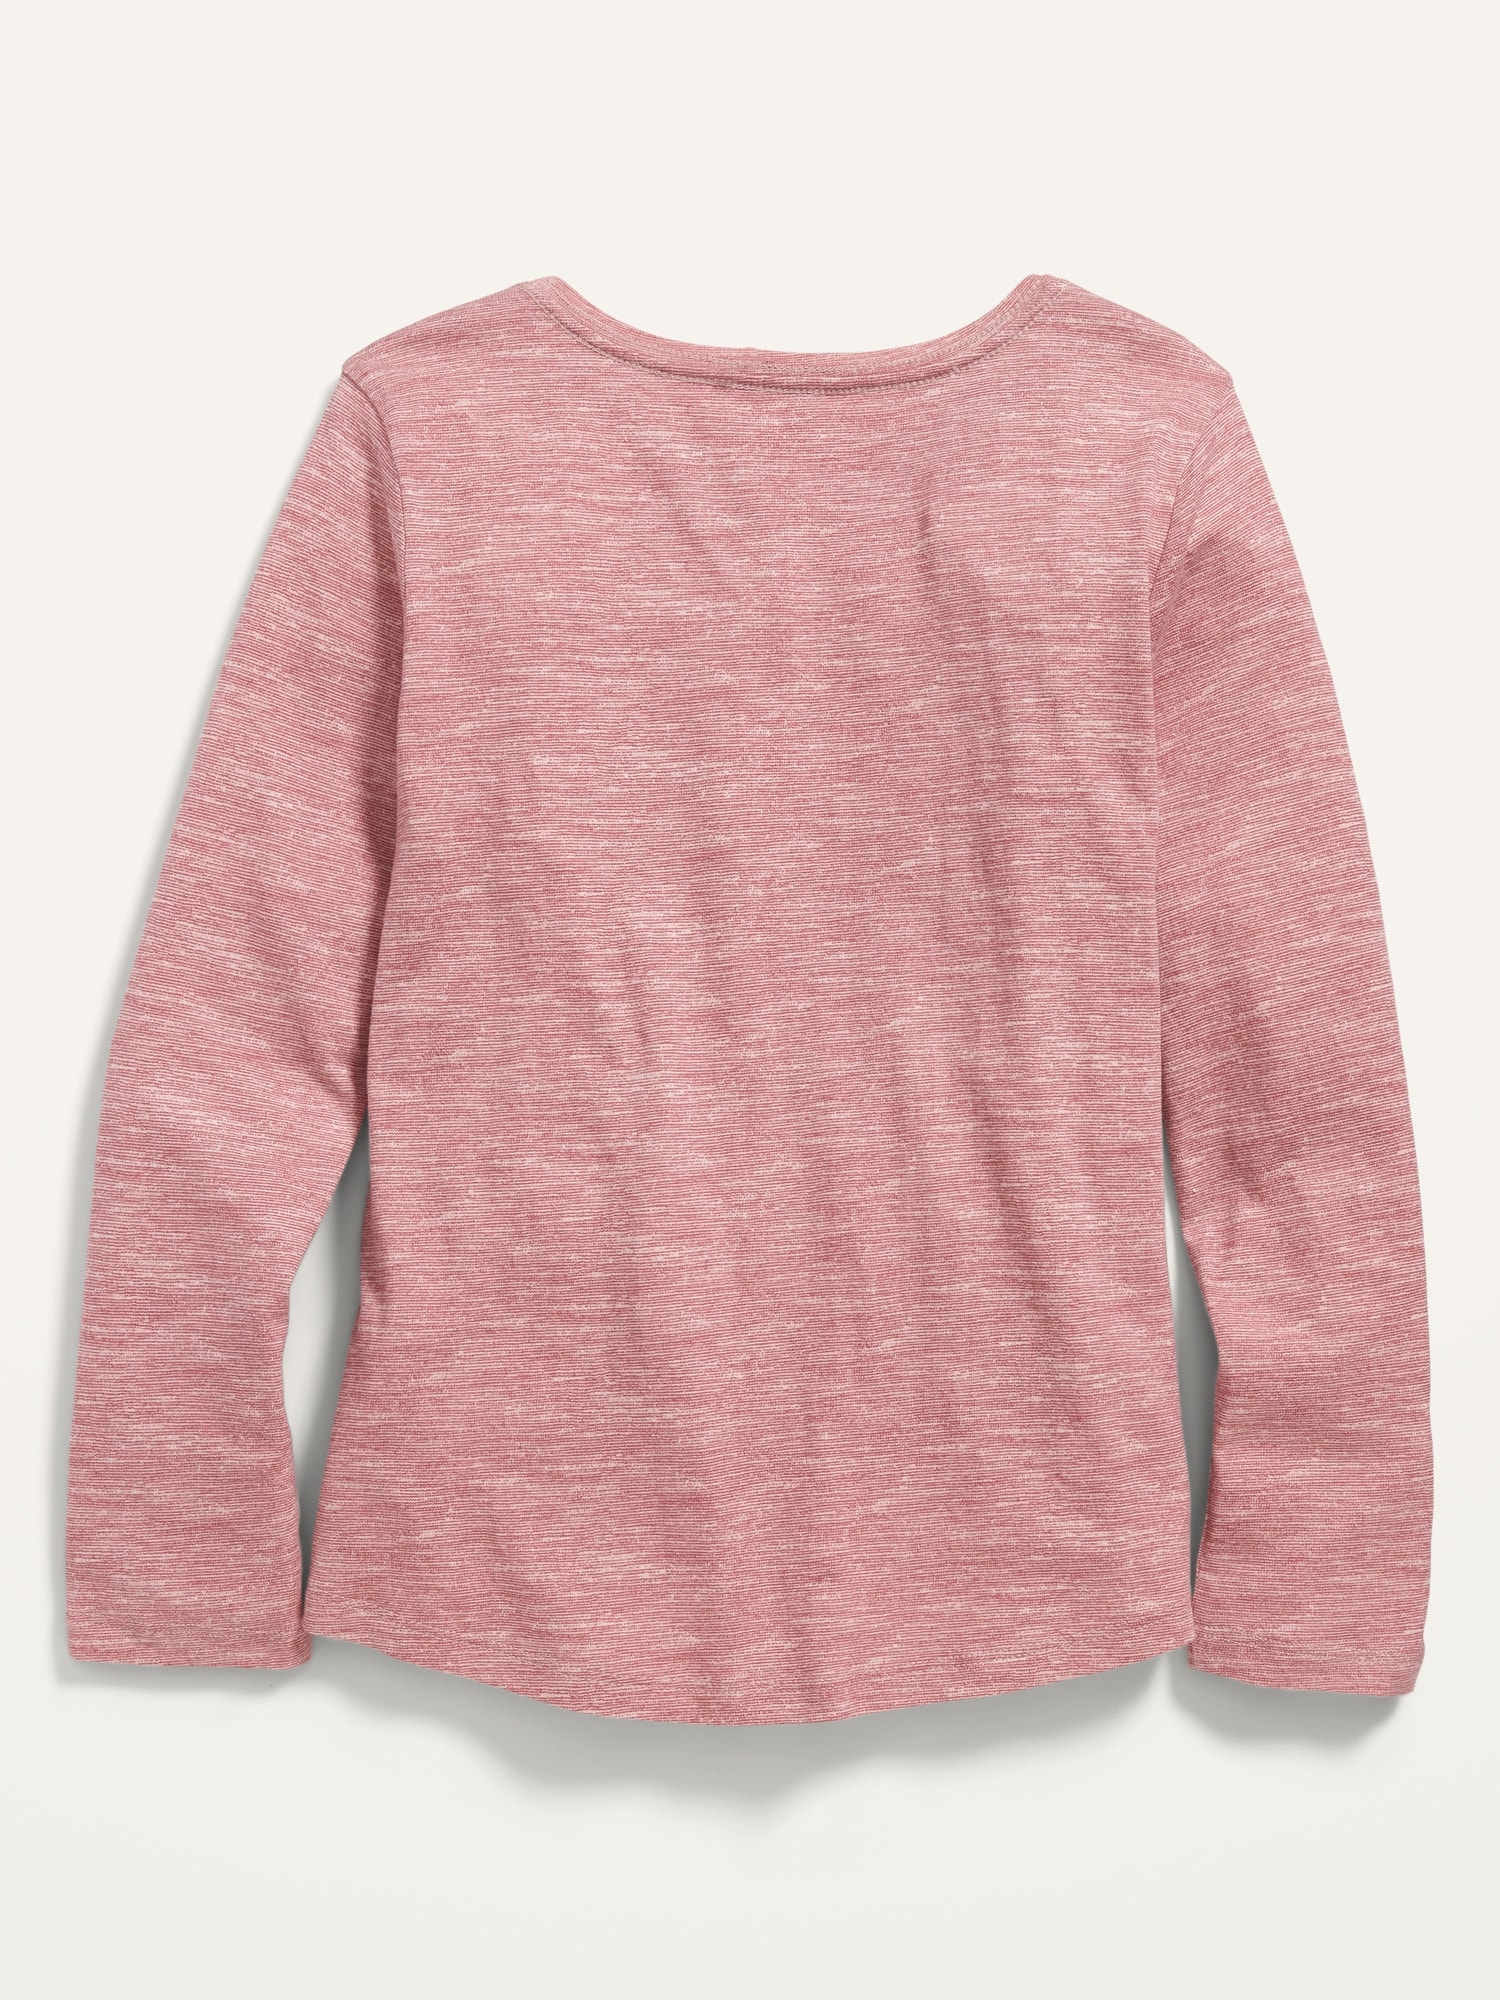 Softest Long Sleeve Scoop Neck T Shirt For Girls Old Navy 